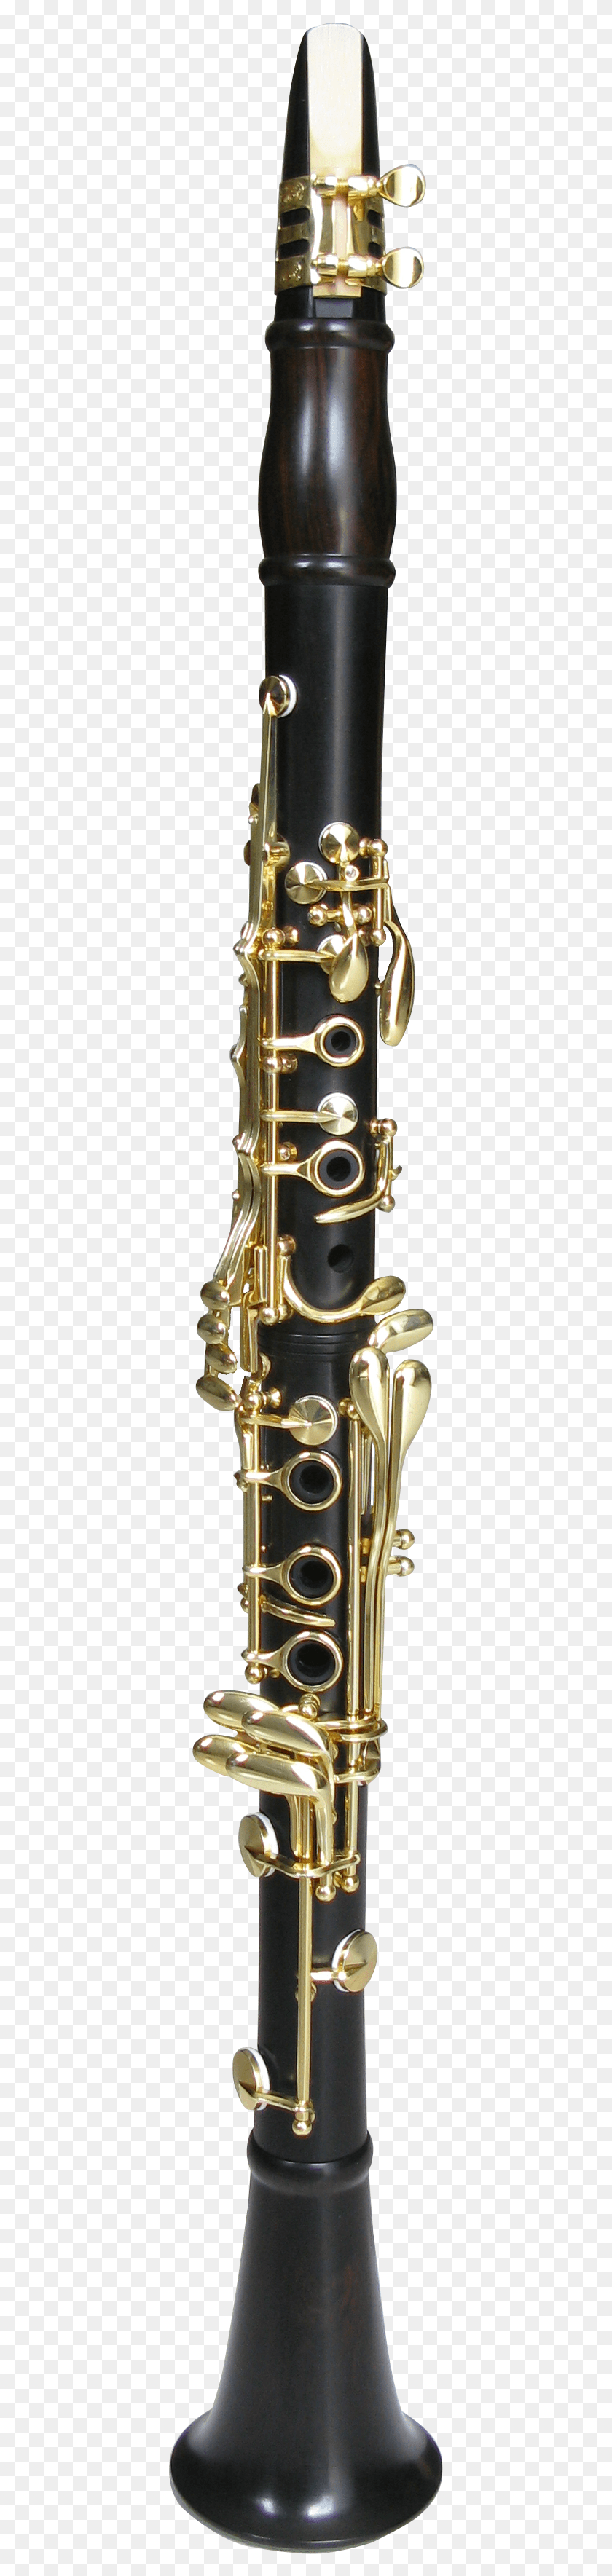 377x3477 Clarinete Png